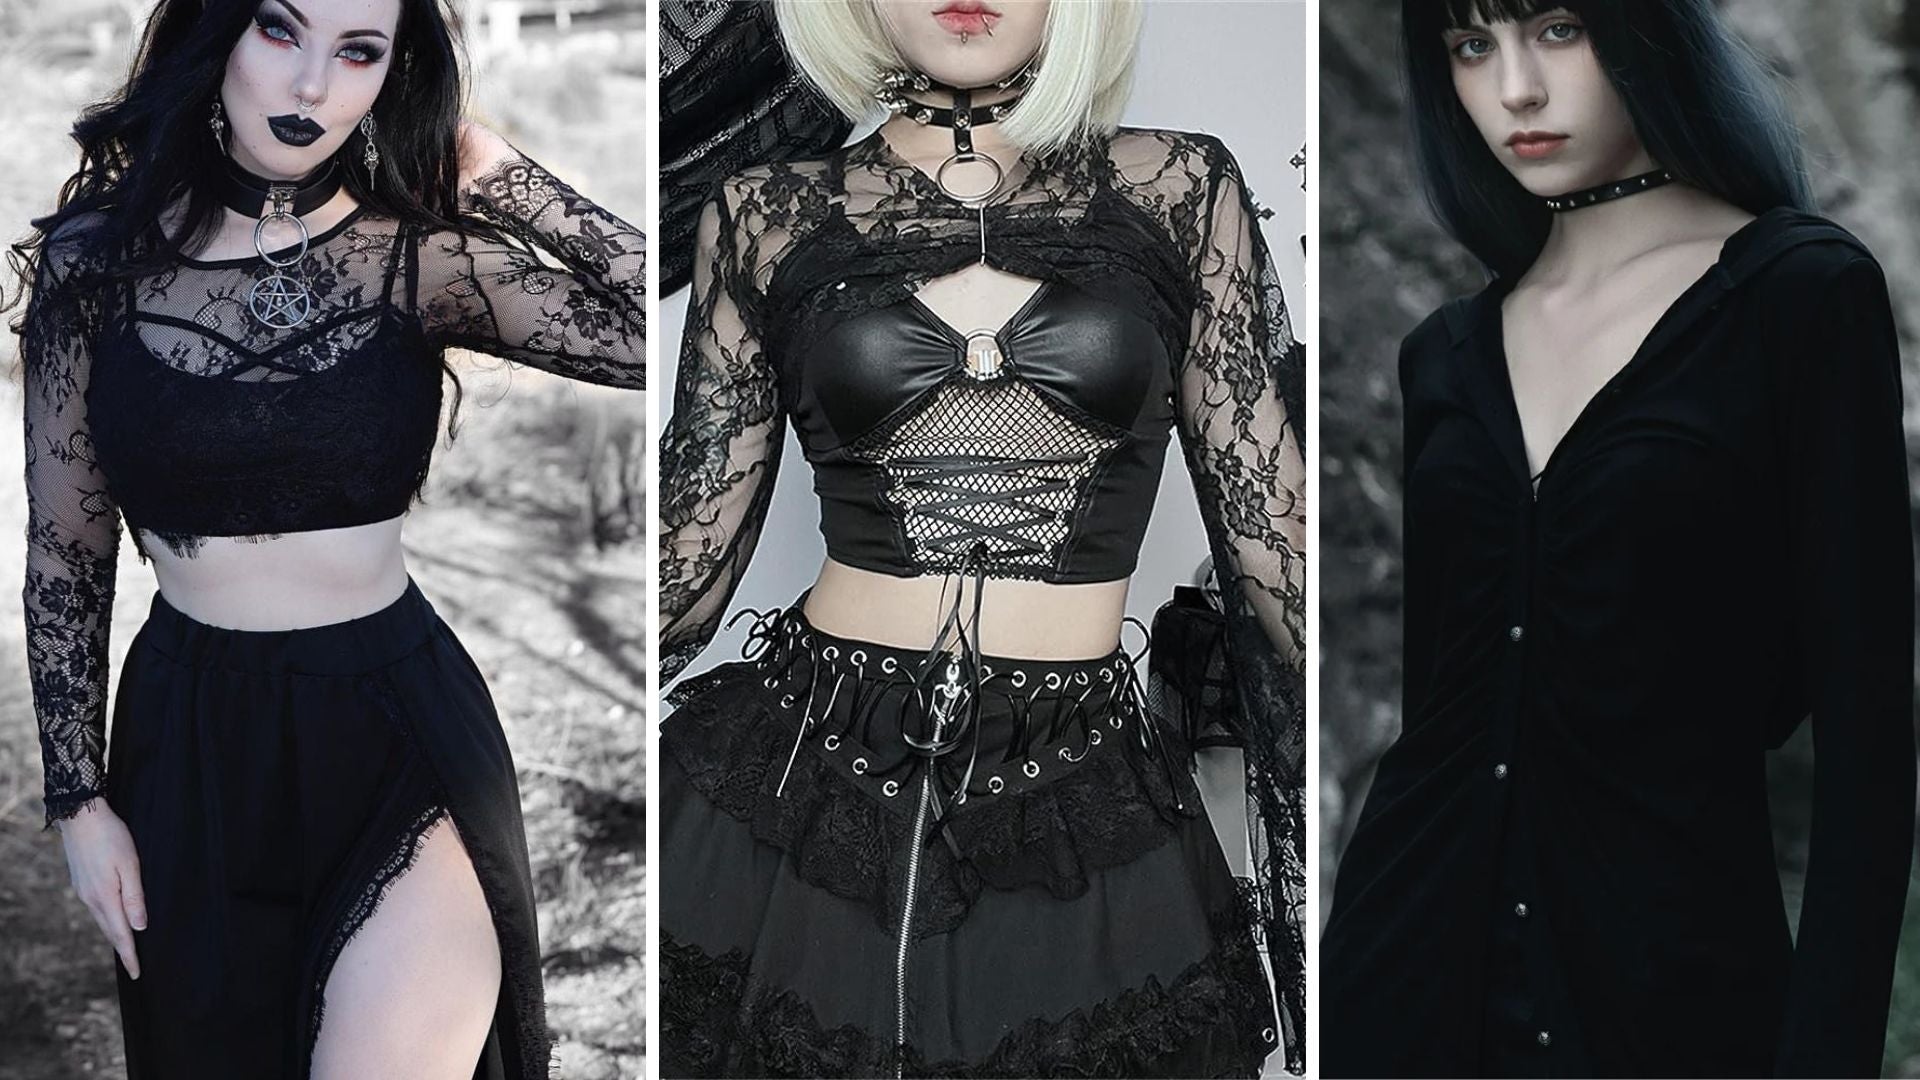 How To Master The Gothic Style With Confidence